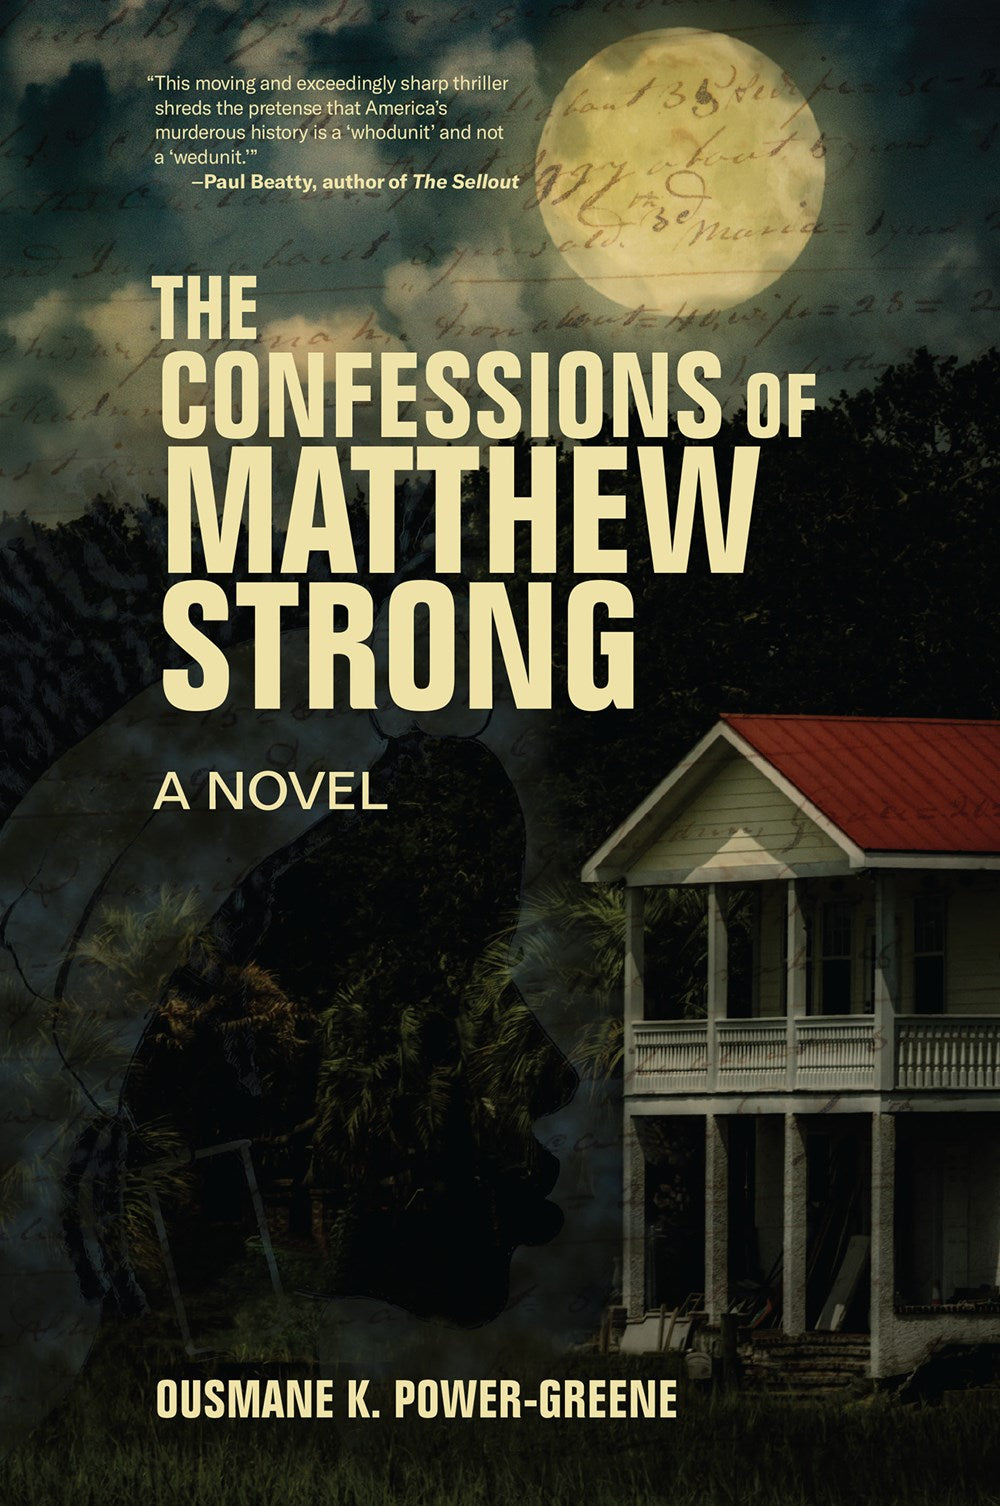 The Confessions of Matthew Strong: A Novel by Ousmane K. Power-Greene